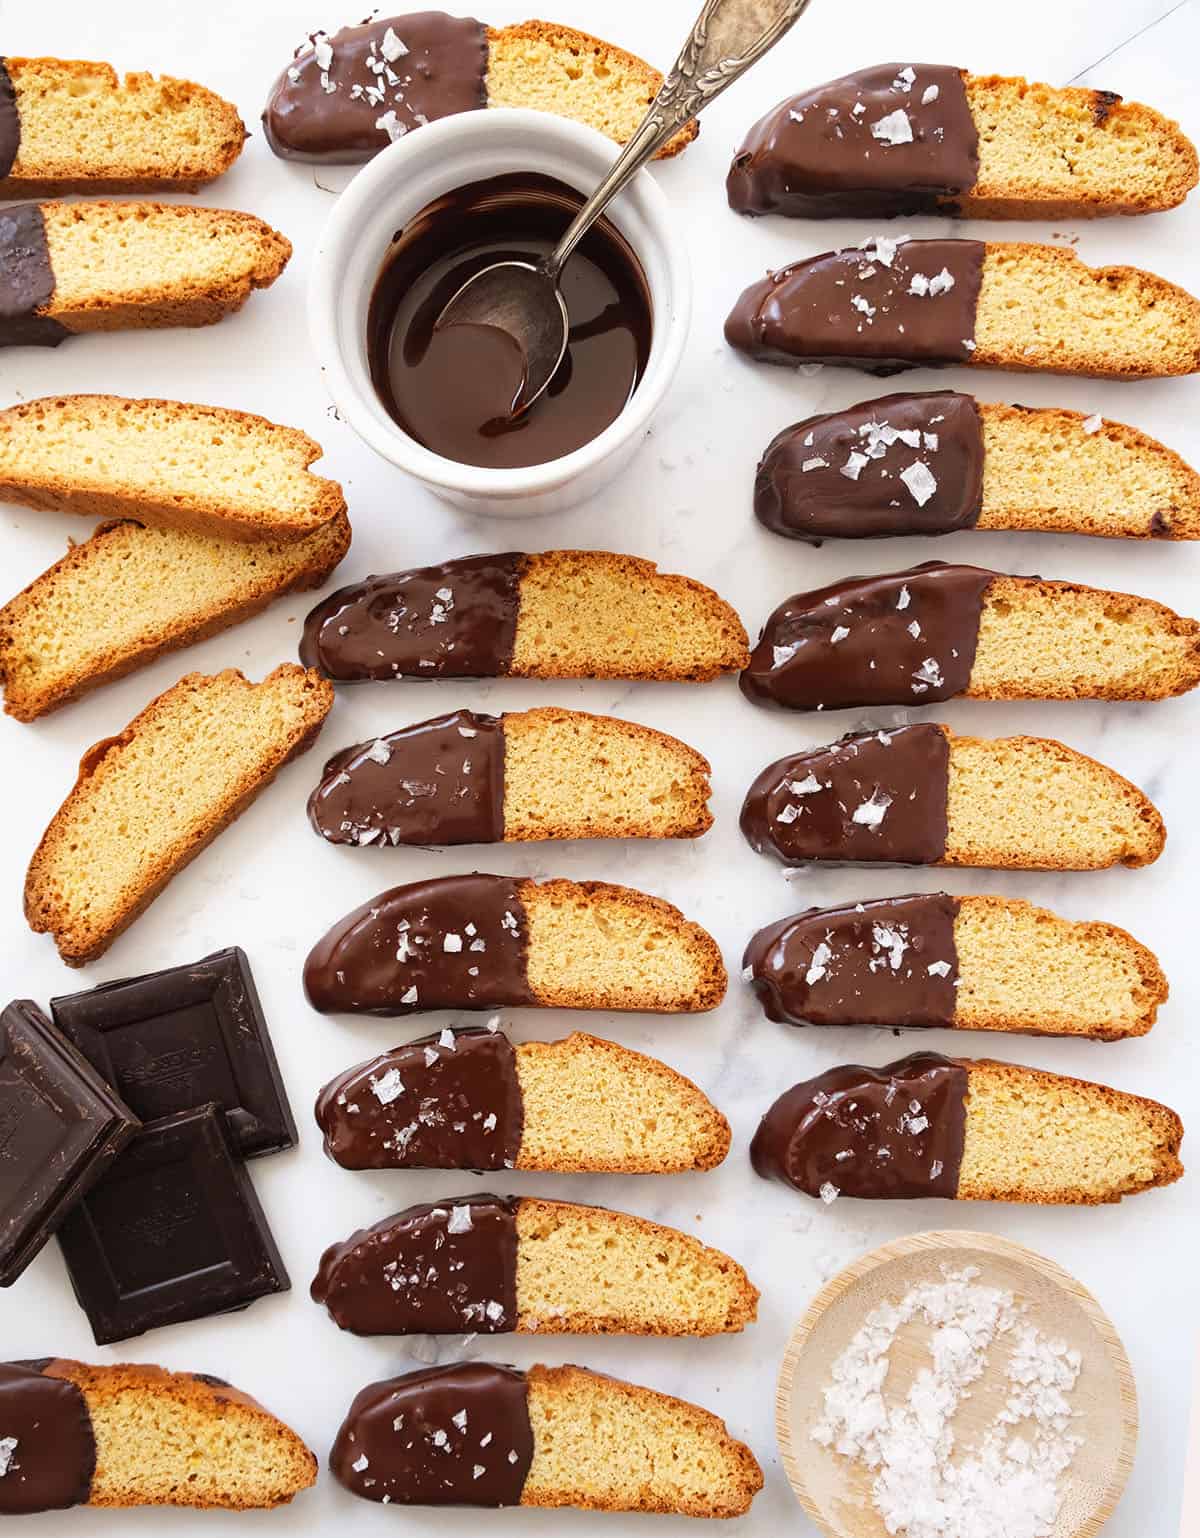 Top view of several chocolate biscotti and melted chocolate in a small bowl over a white background.